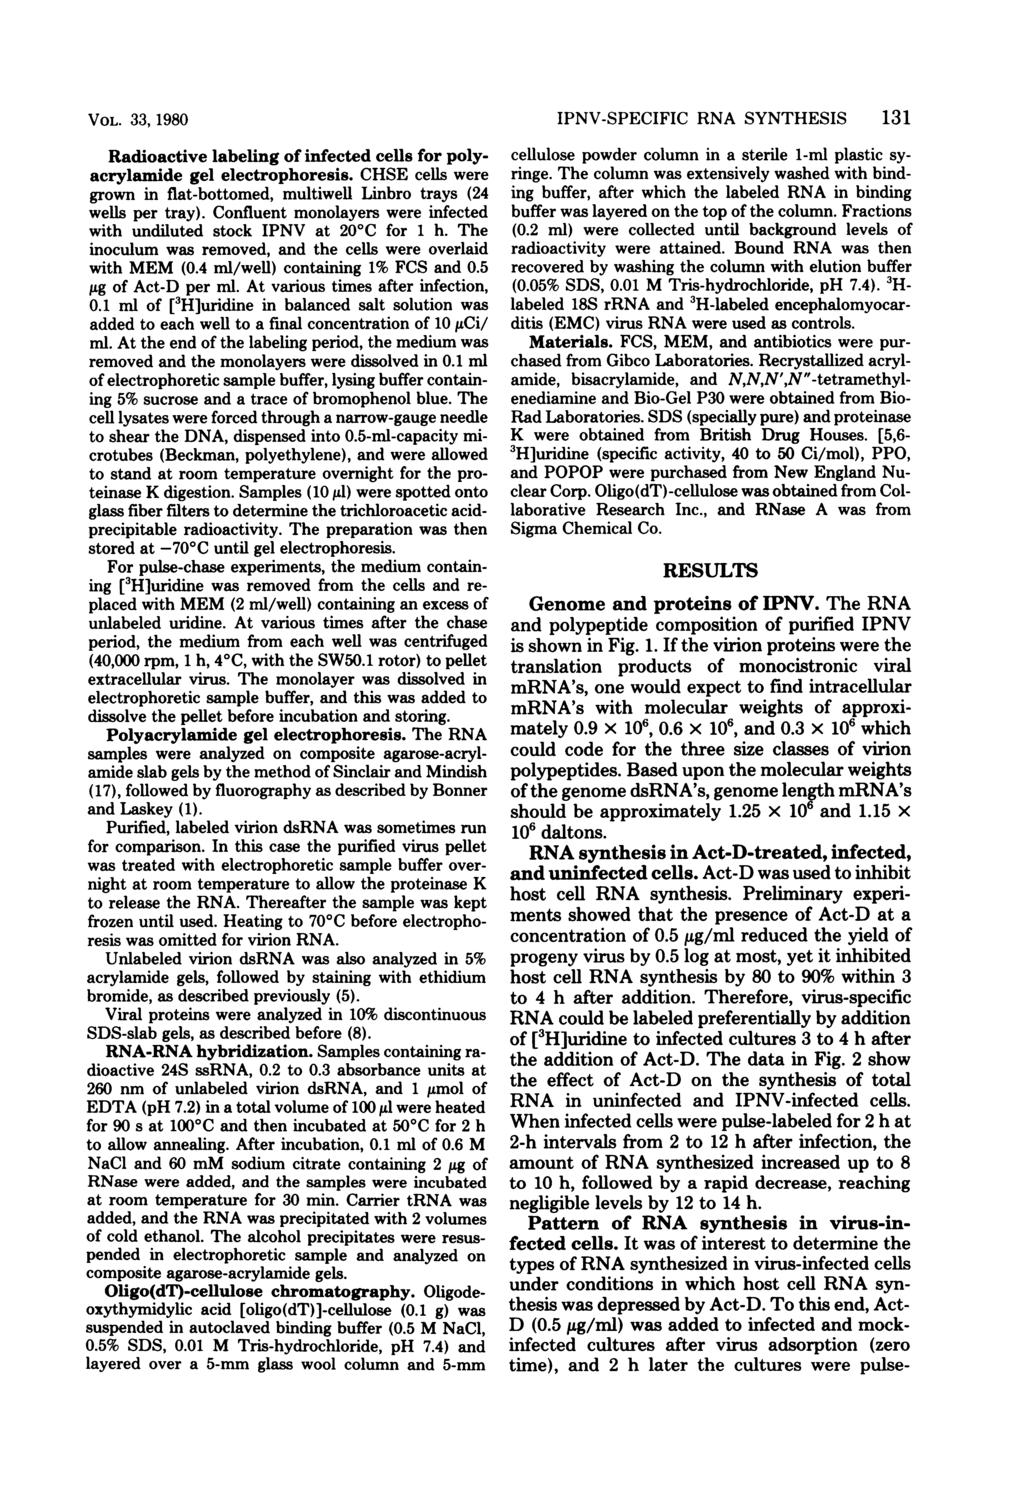 VOL. 33, 1980 Radioactive labeling of infected cells for polyacrylamide gel electrophoresis. CHSE cells were grown in flat-bottomed, multiwell Linbro trays (24 wells per tray).